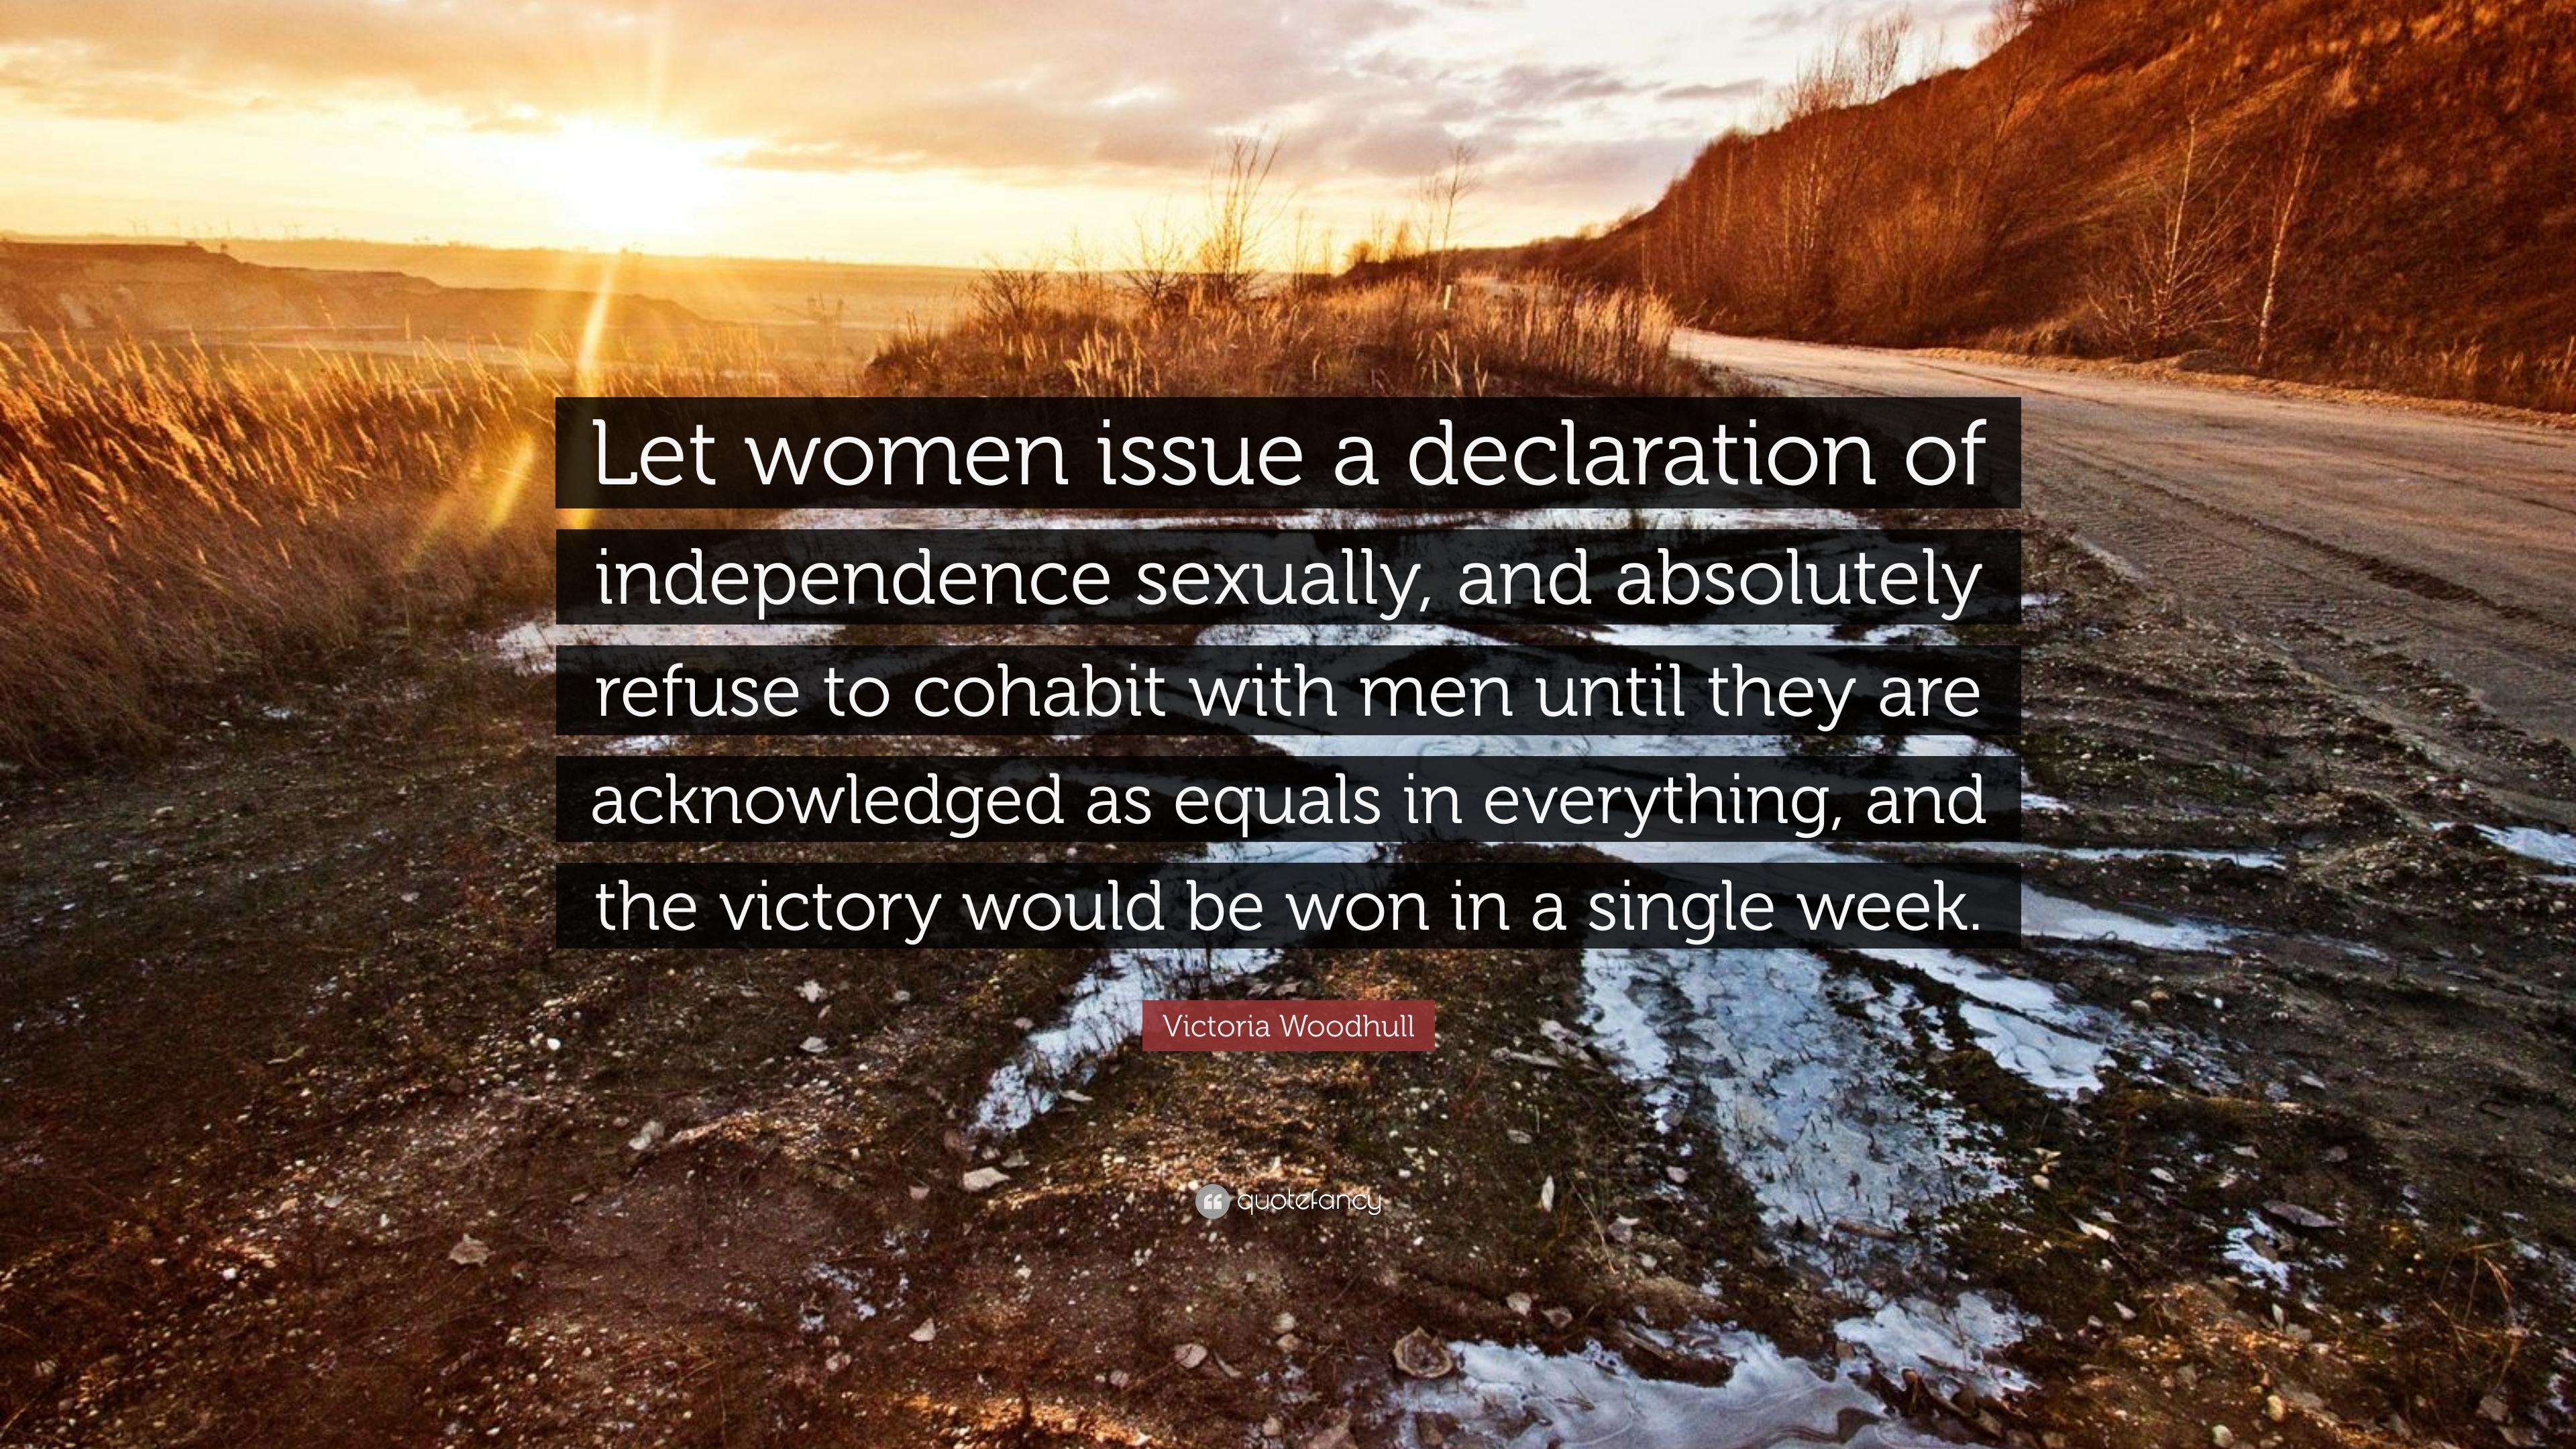 Victoria Woodhull Quote: “Let women issue a declaration